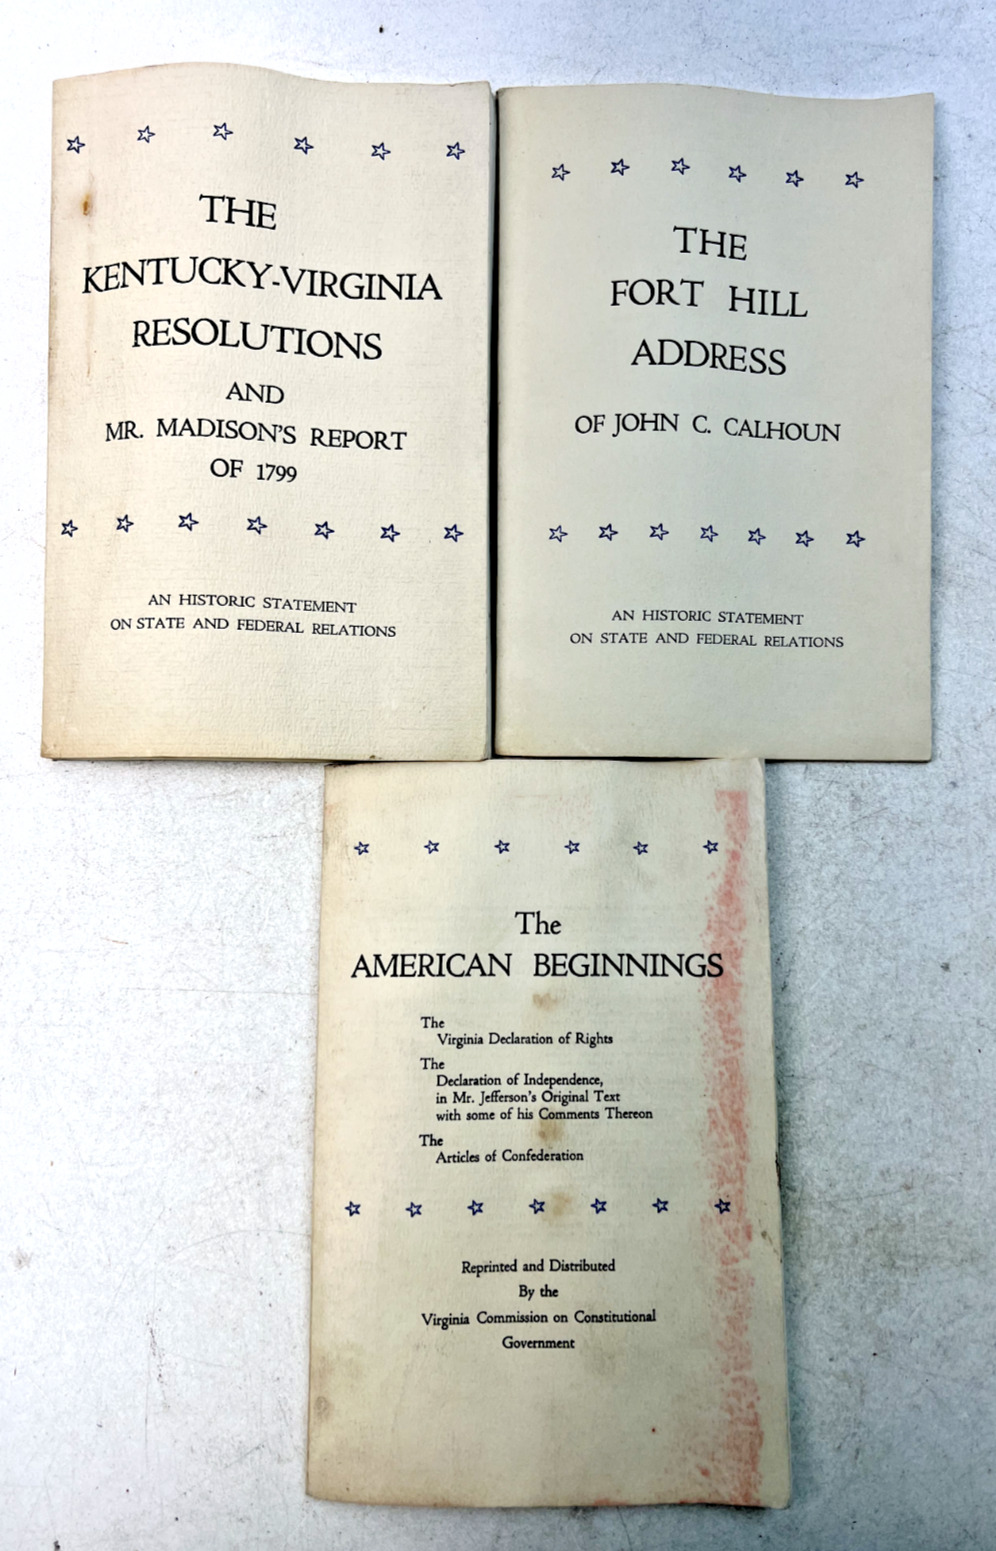 VTG 1960-1961 Series of Historic Statements Expounding the Role of the States...